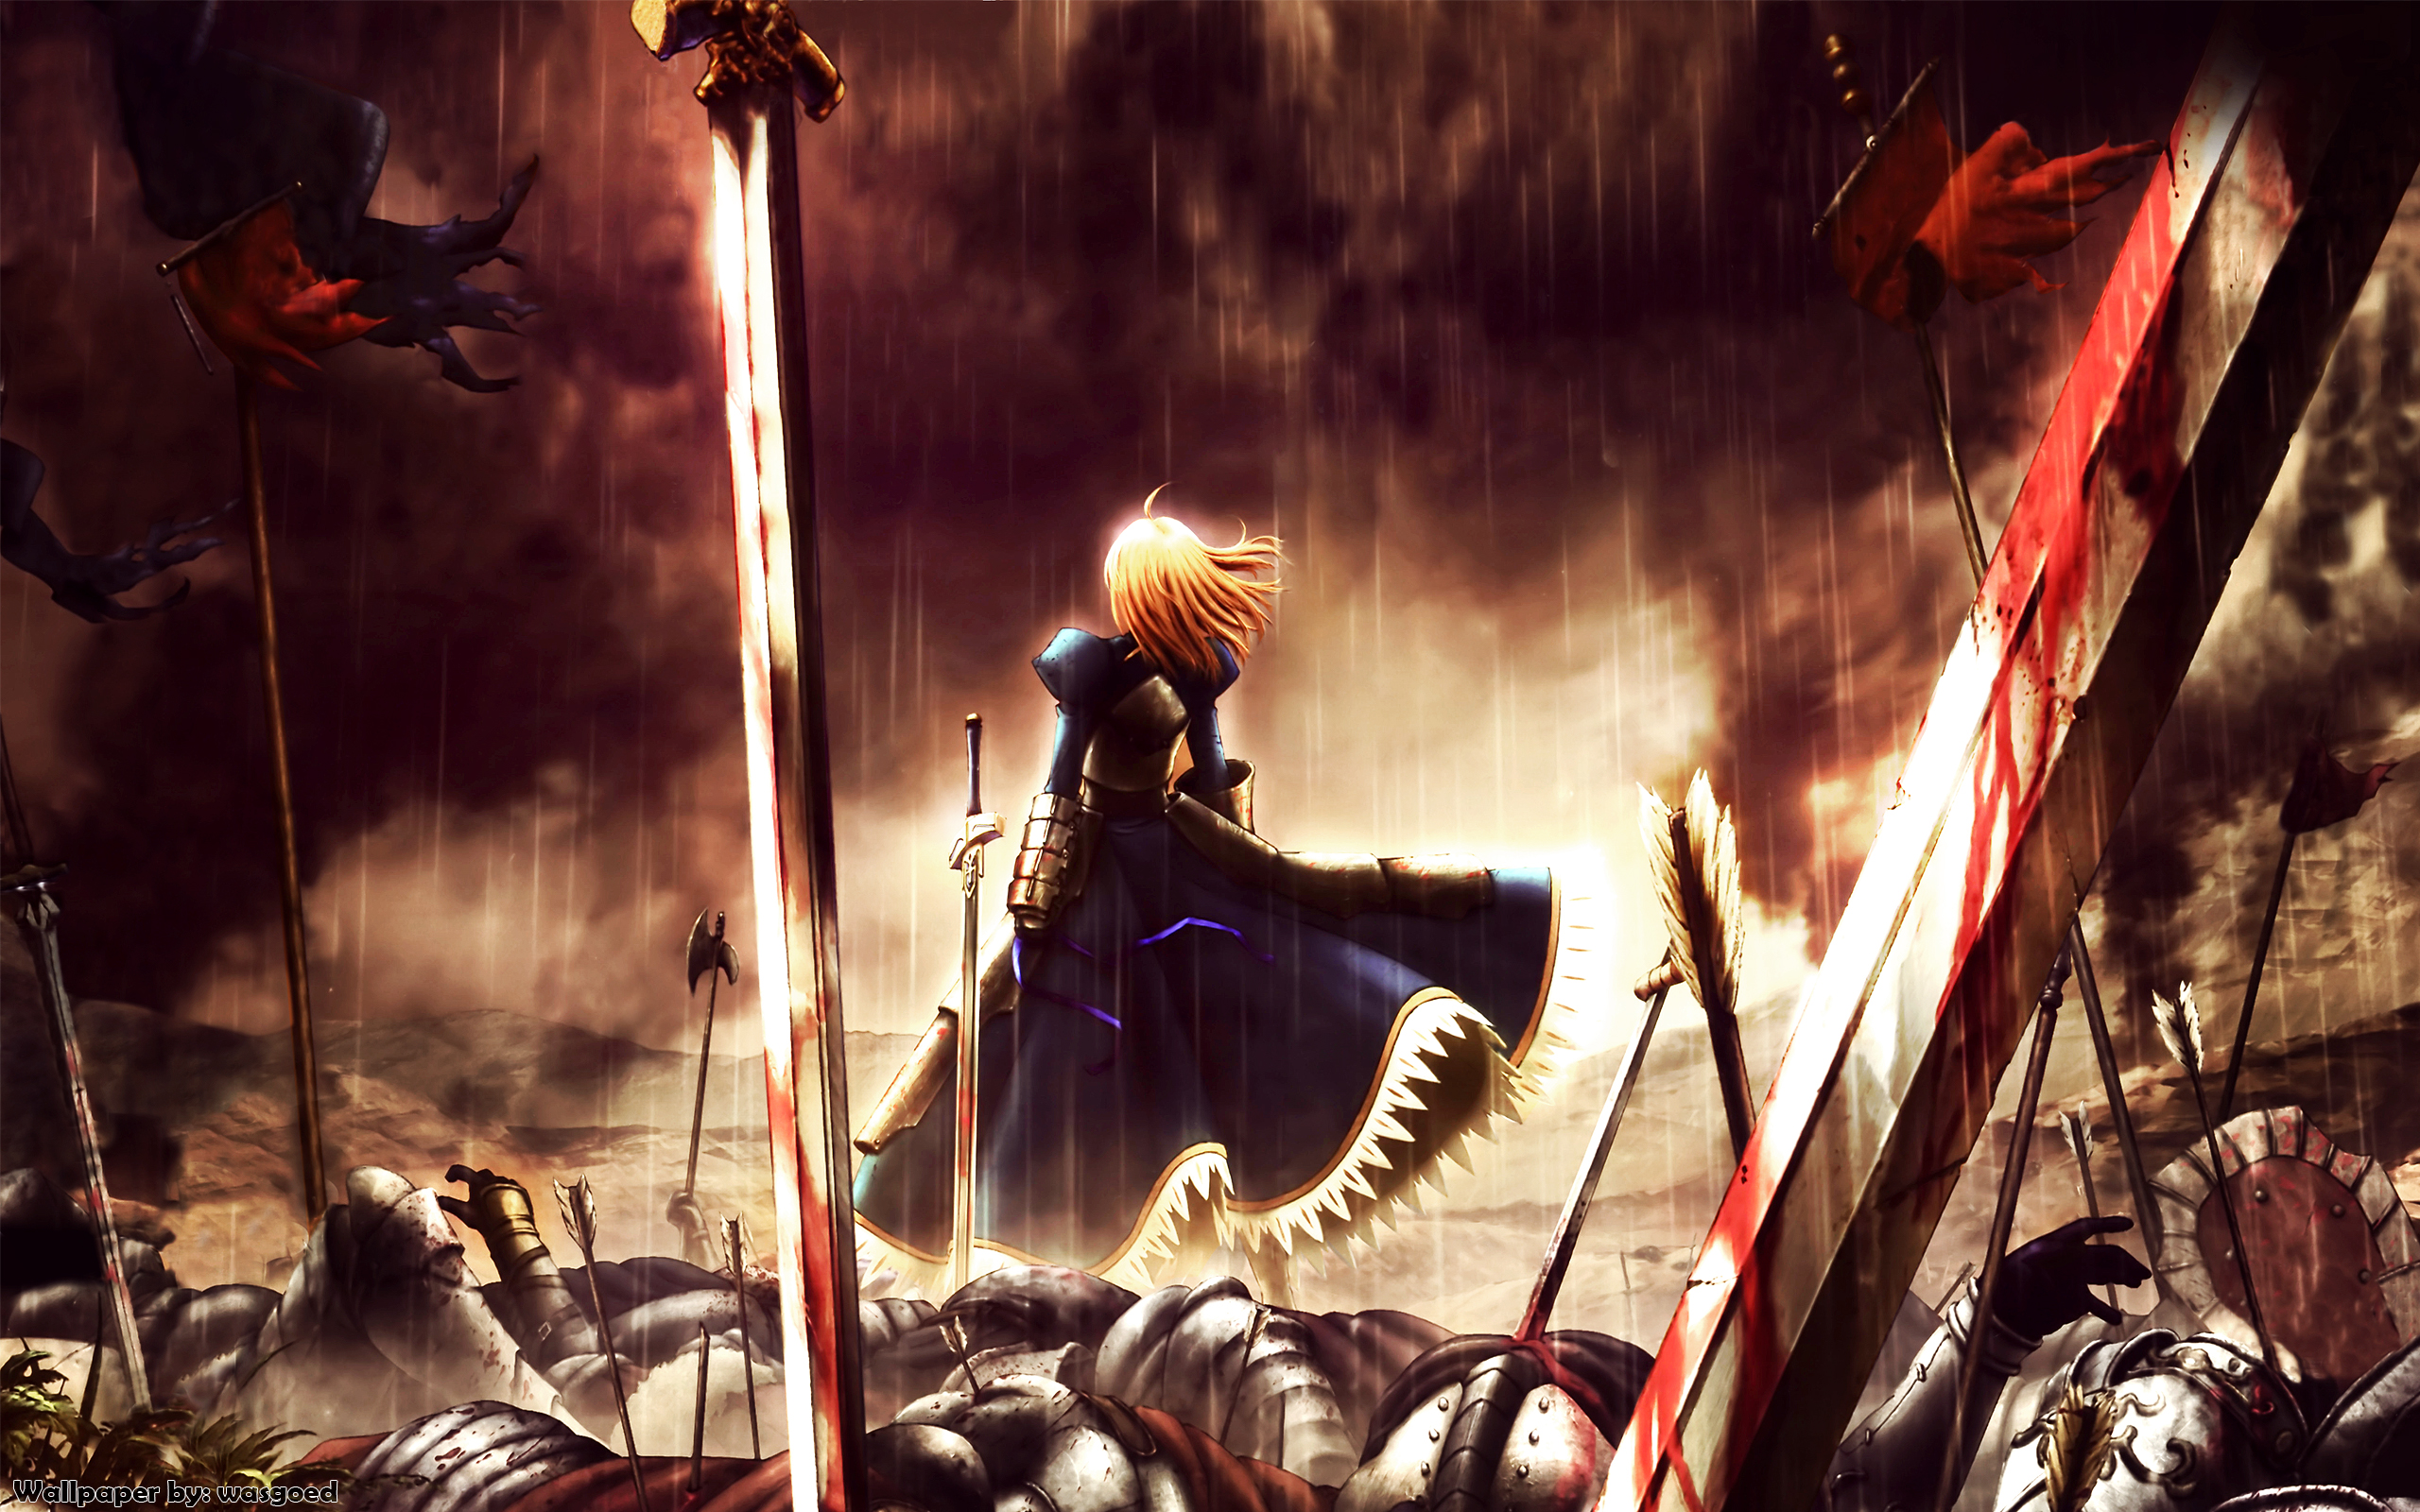 android saber (fate series), fate series, fate/zero, anime